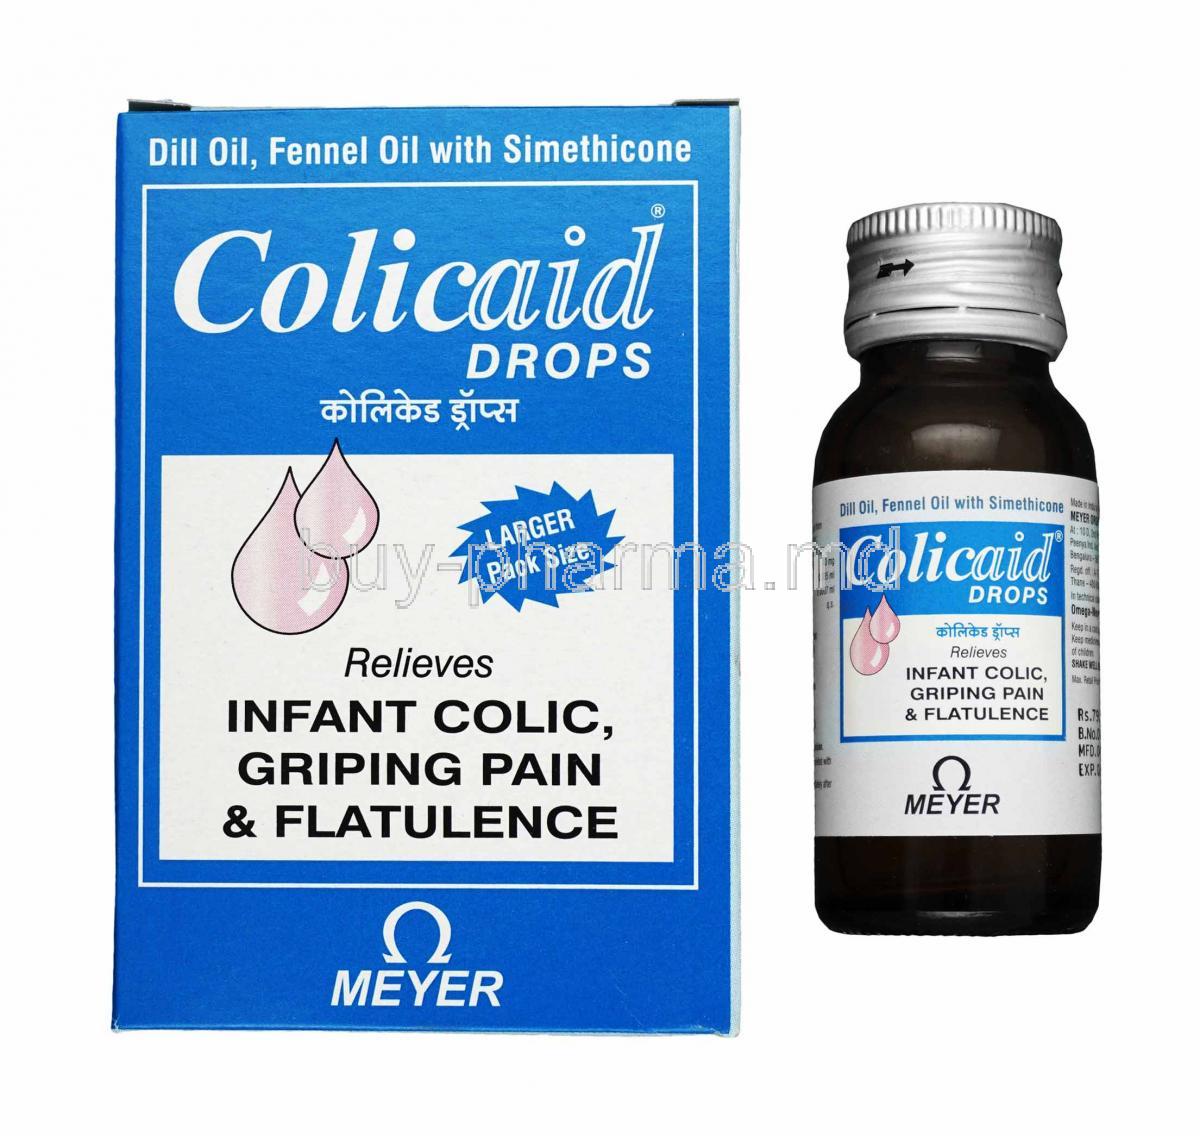 Colicaid Drops 30ml box and bottle